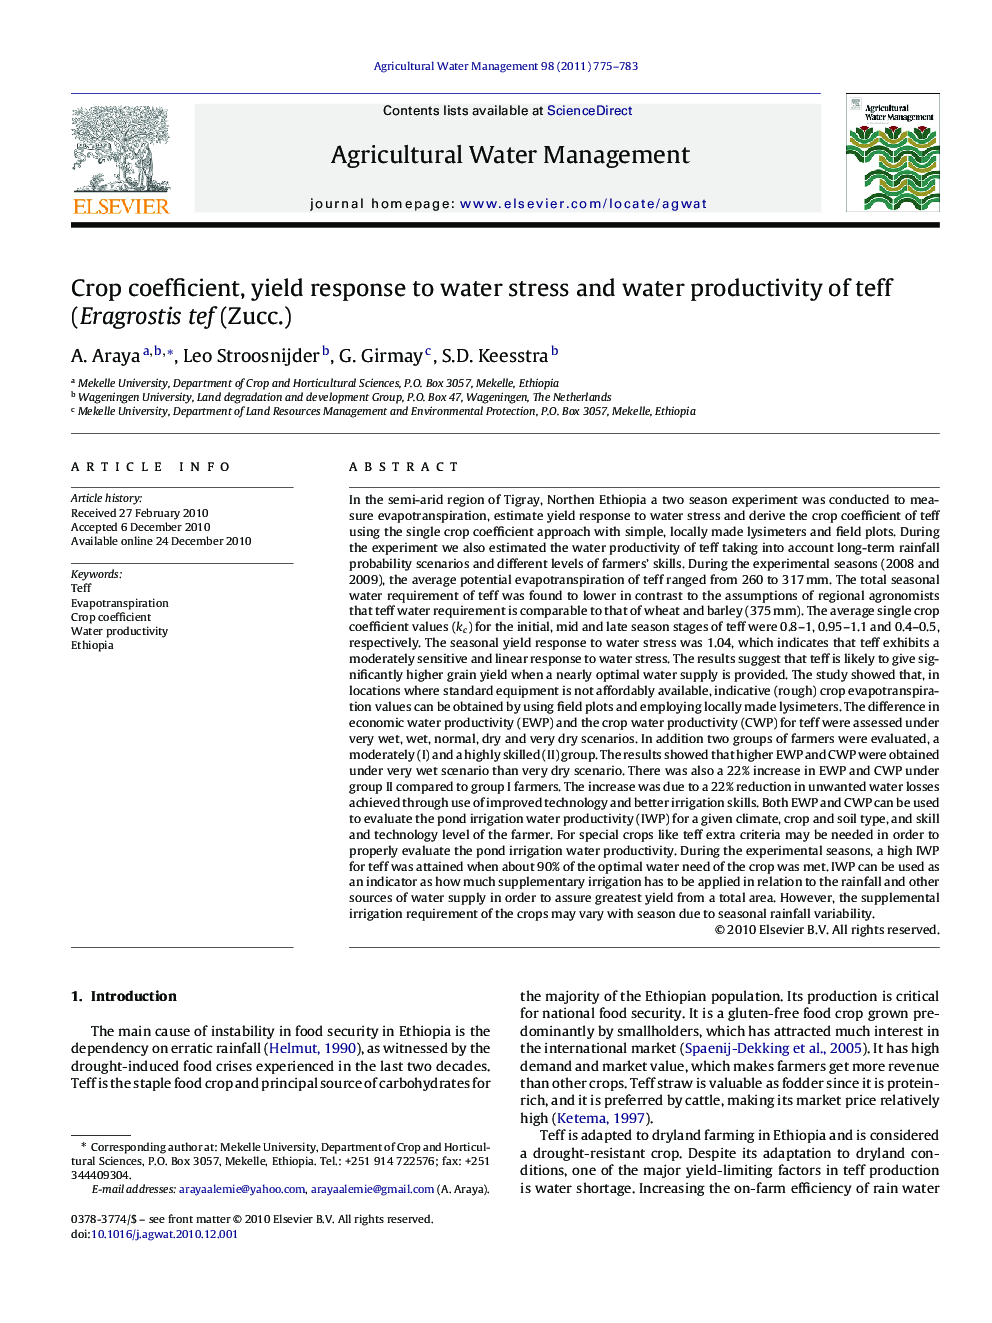 Crop coefficient, yield response to water stress and water productivity of teff (Eragrostis tef (Zucc.)